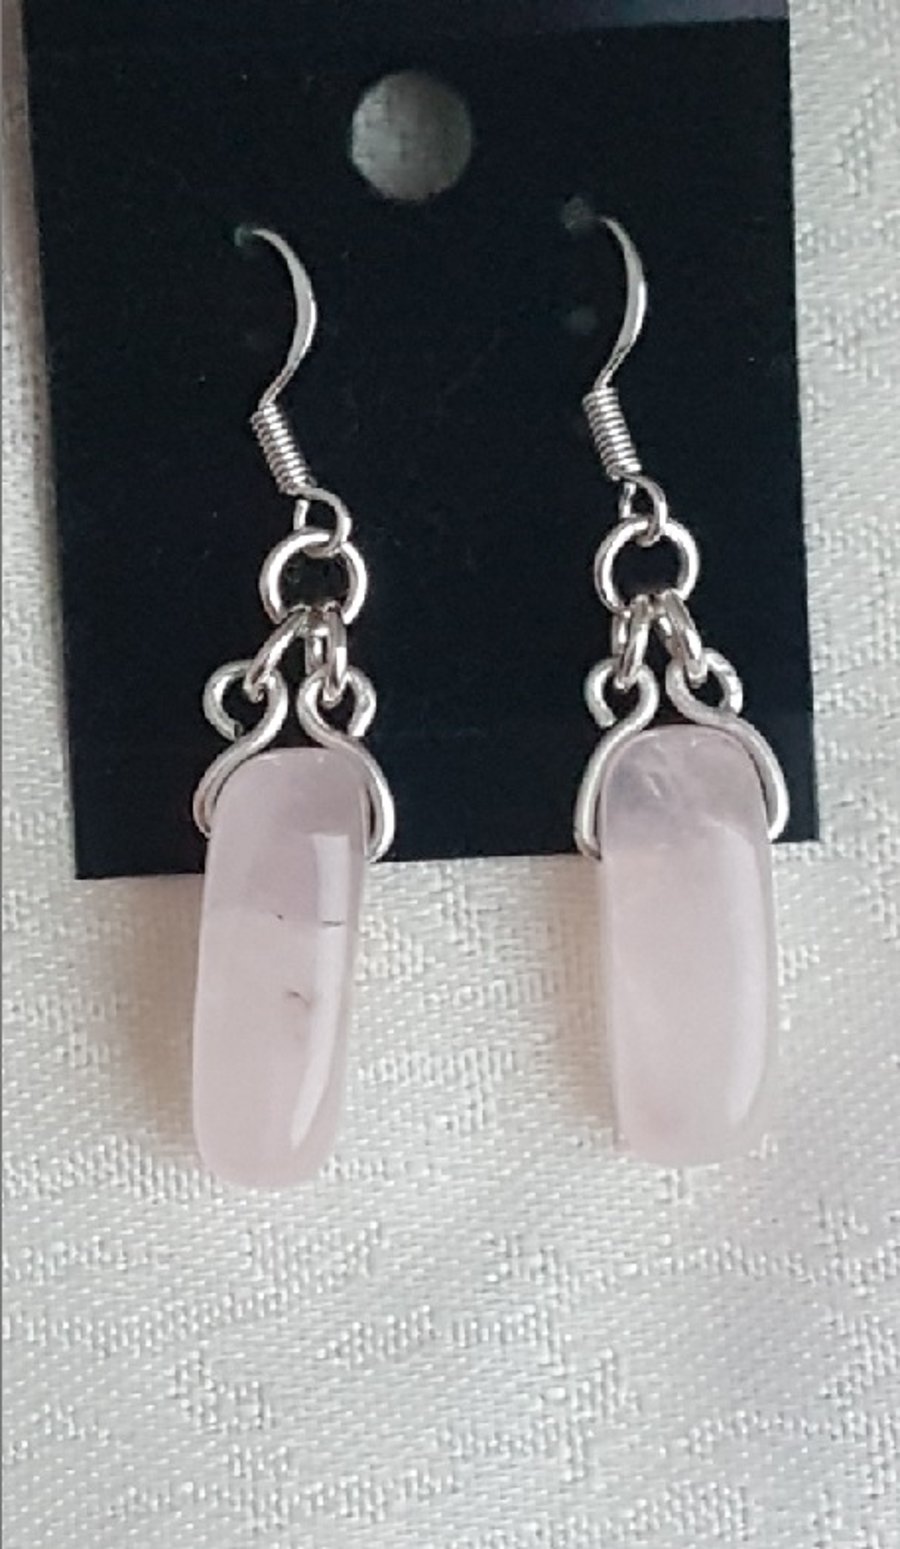 Beautiful Rose Quartz and Sterling Silver Earrings